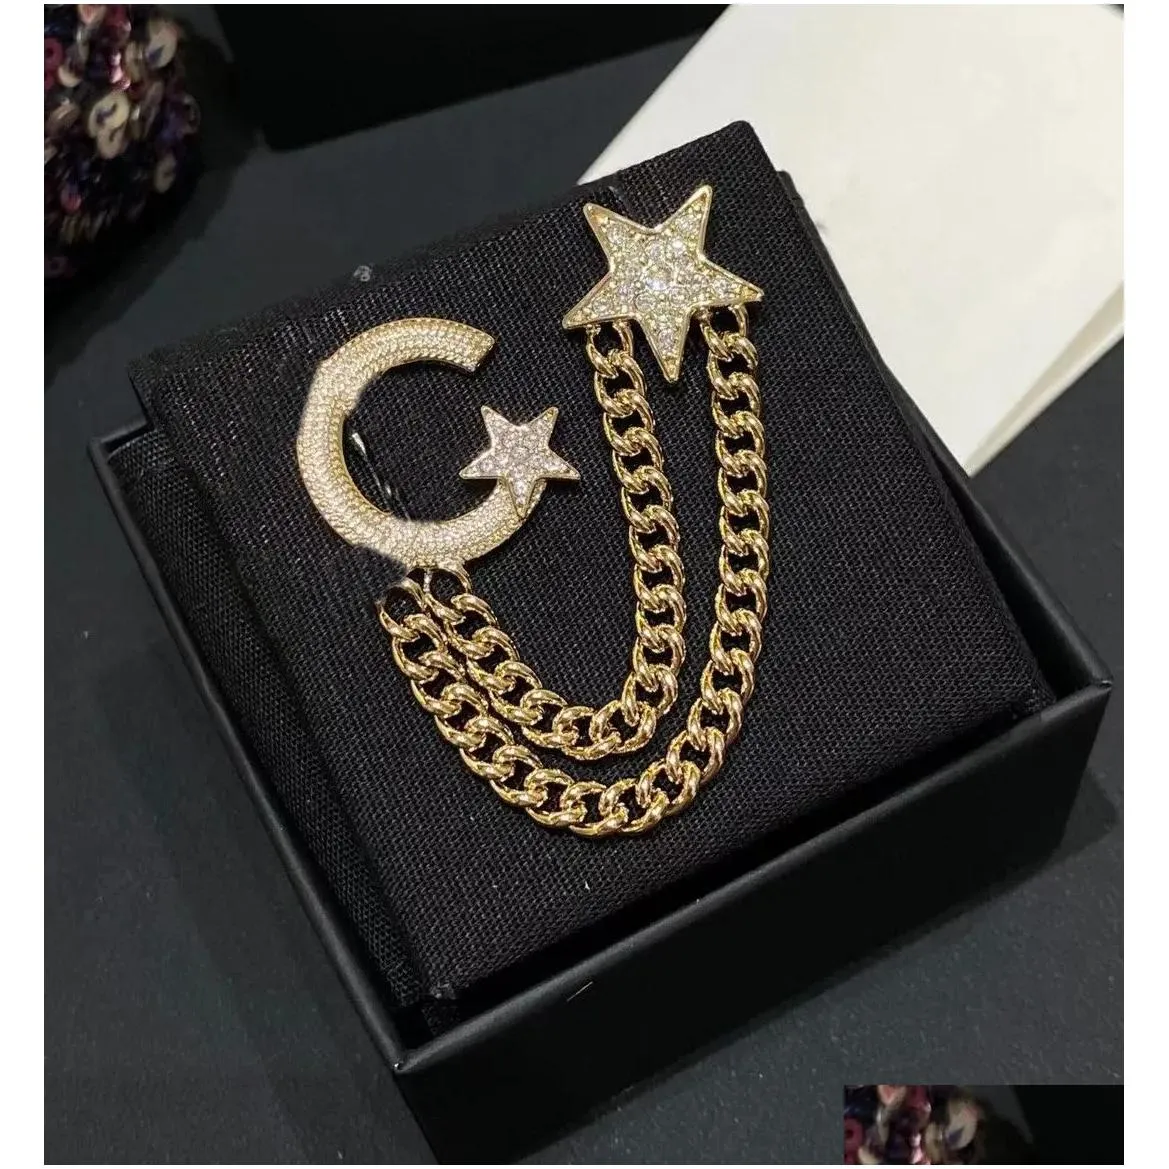 Charm 2023 Luxury Quality Charm Pendant Necklace With Diamond And Star Shape Chain Design In 18K Gold Plated Have Box Stamp Ps7400B D Dhbut